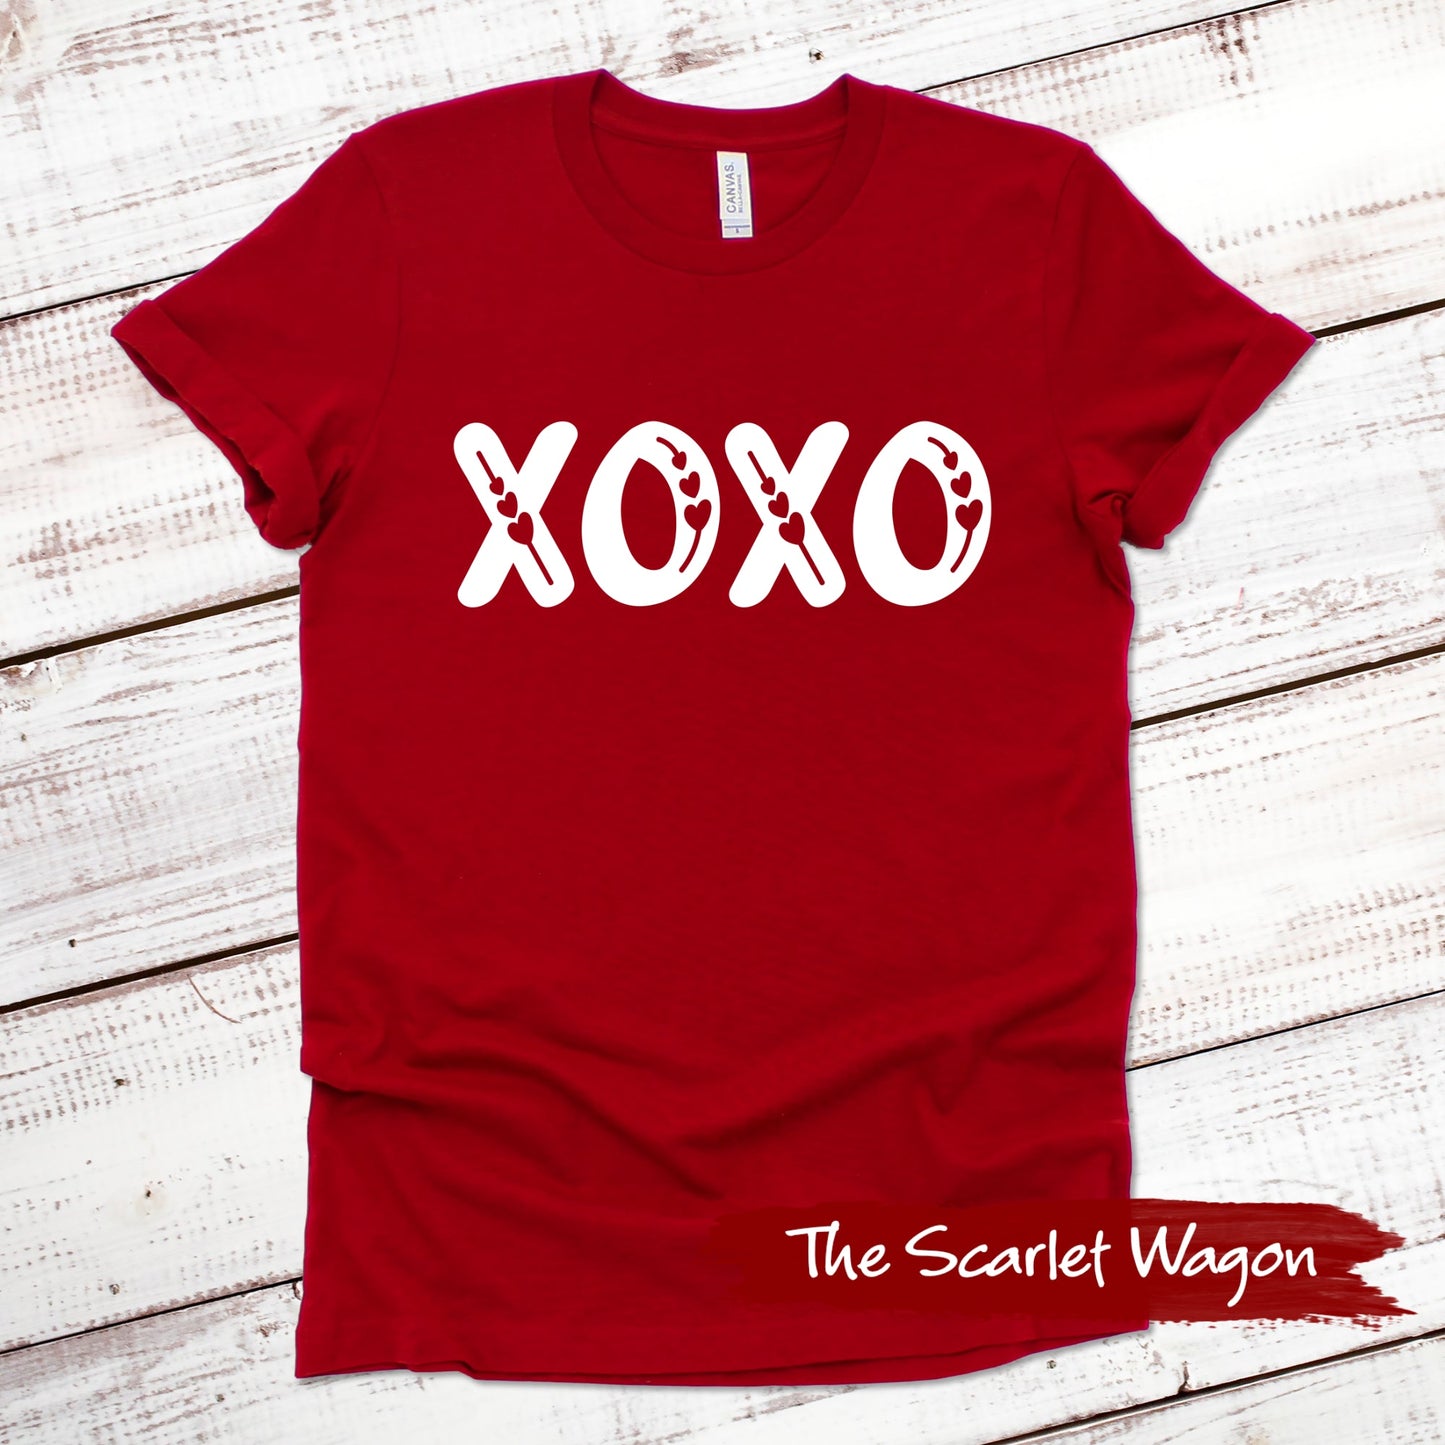 XOXO with Hearts Valentine Shirt Scarlet Wagon Red XS 